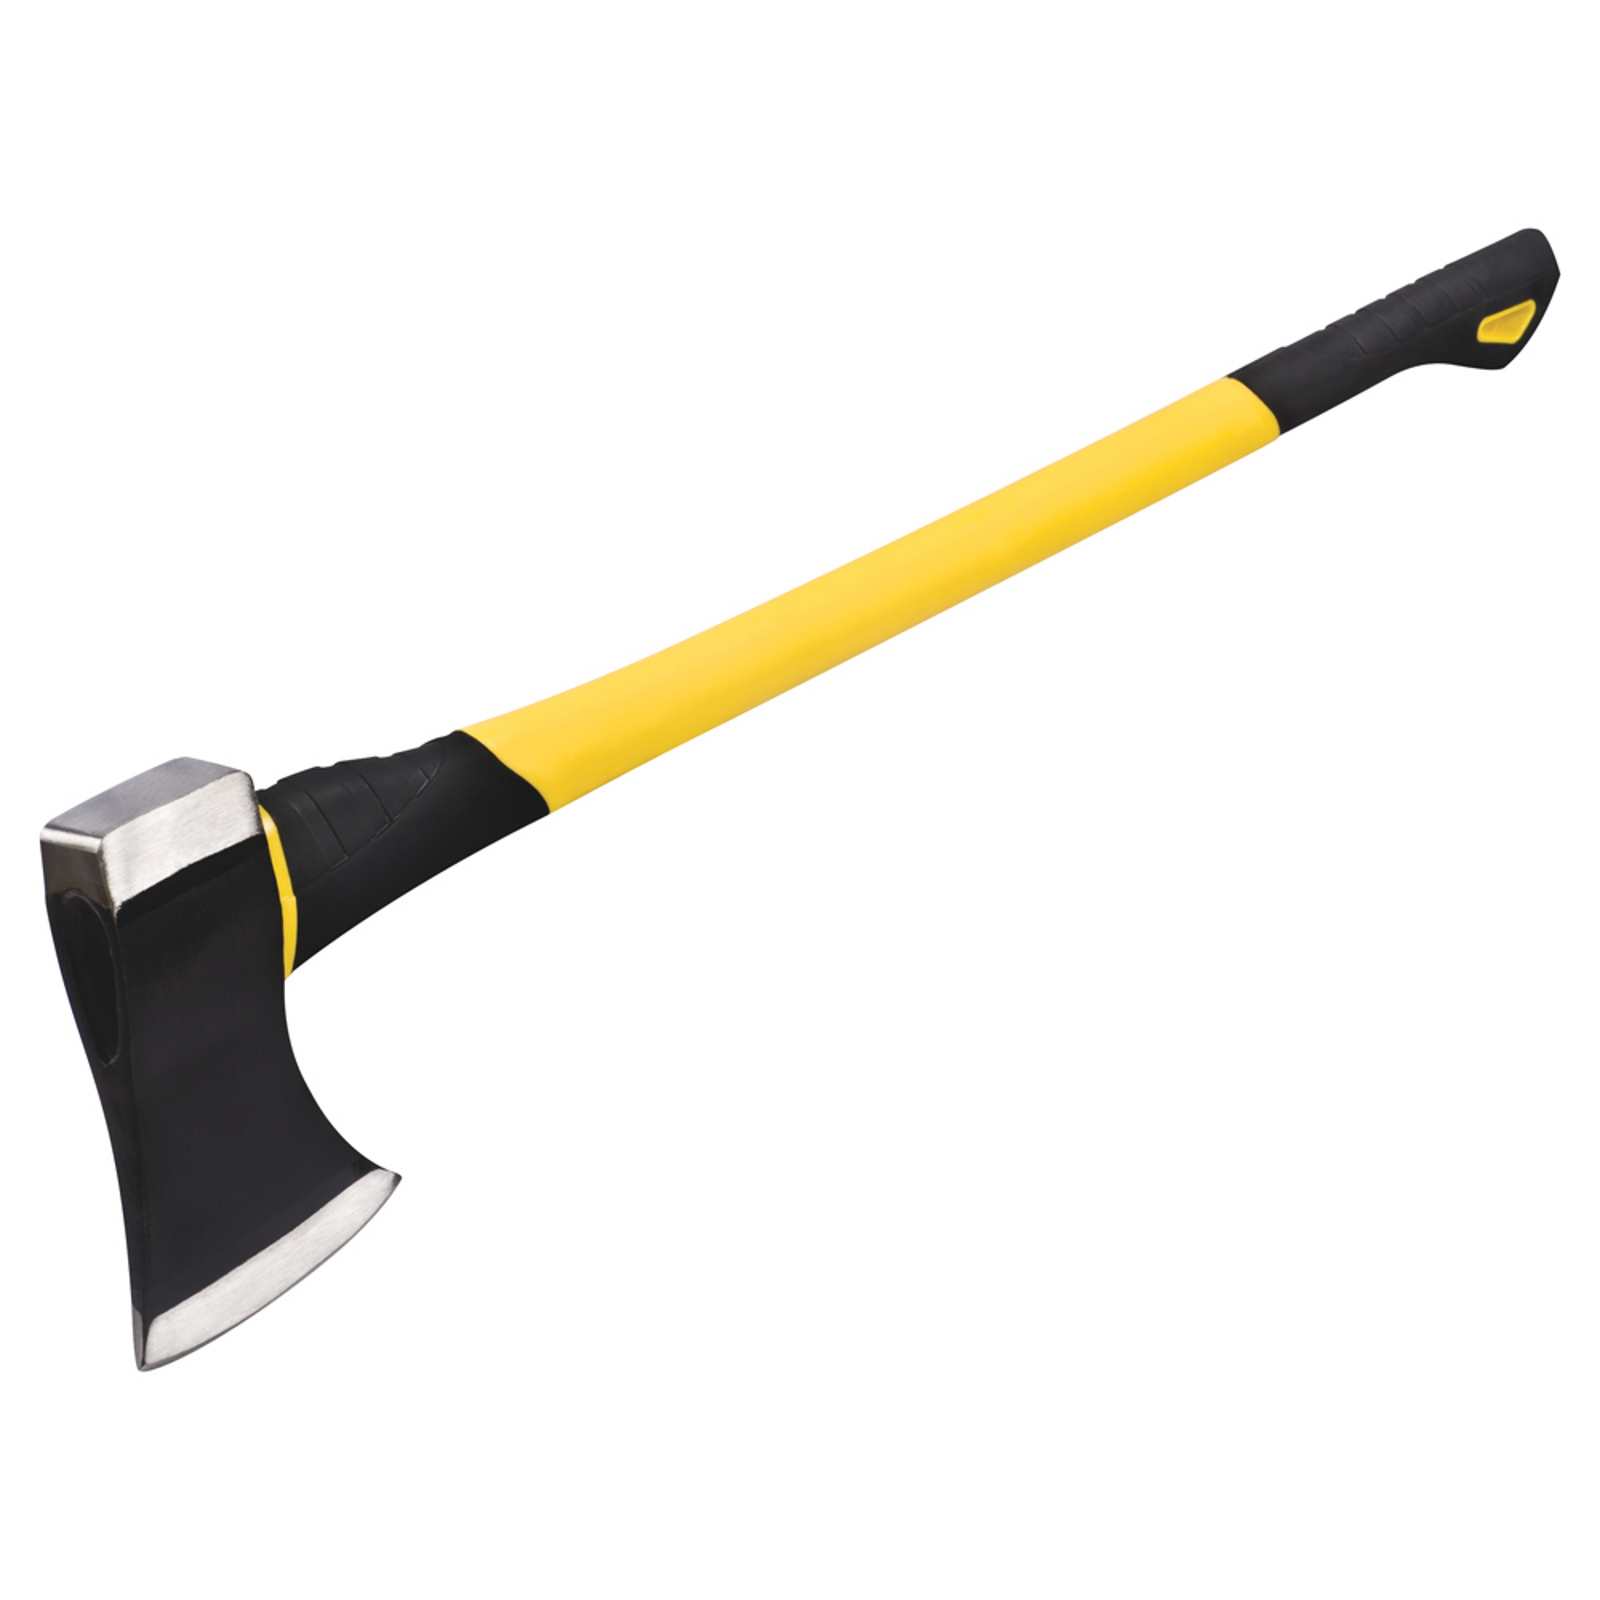 Ludell 12235 3.5 lb. Single Bit Axe with 34 in. Fiberglass Handle